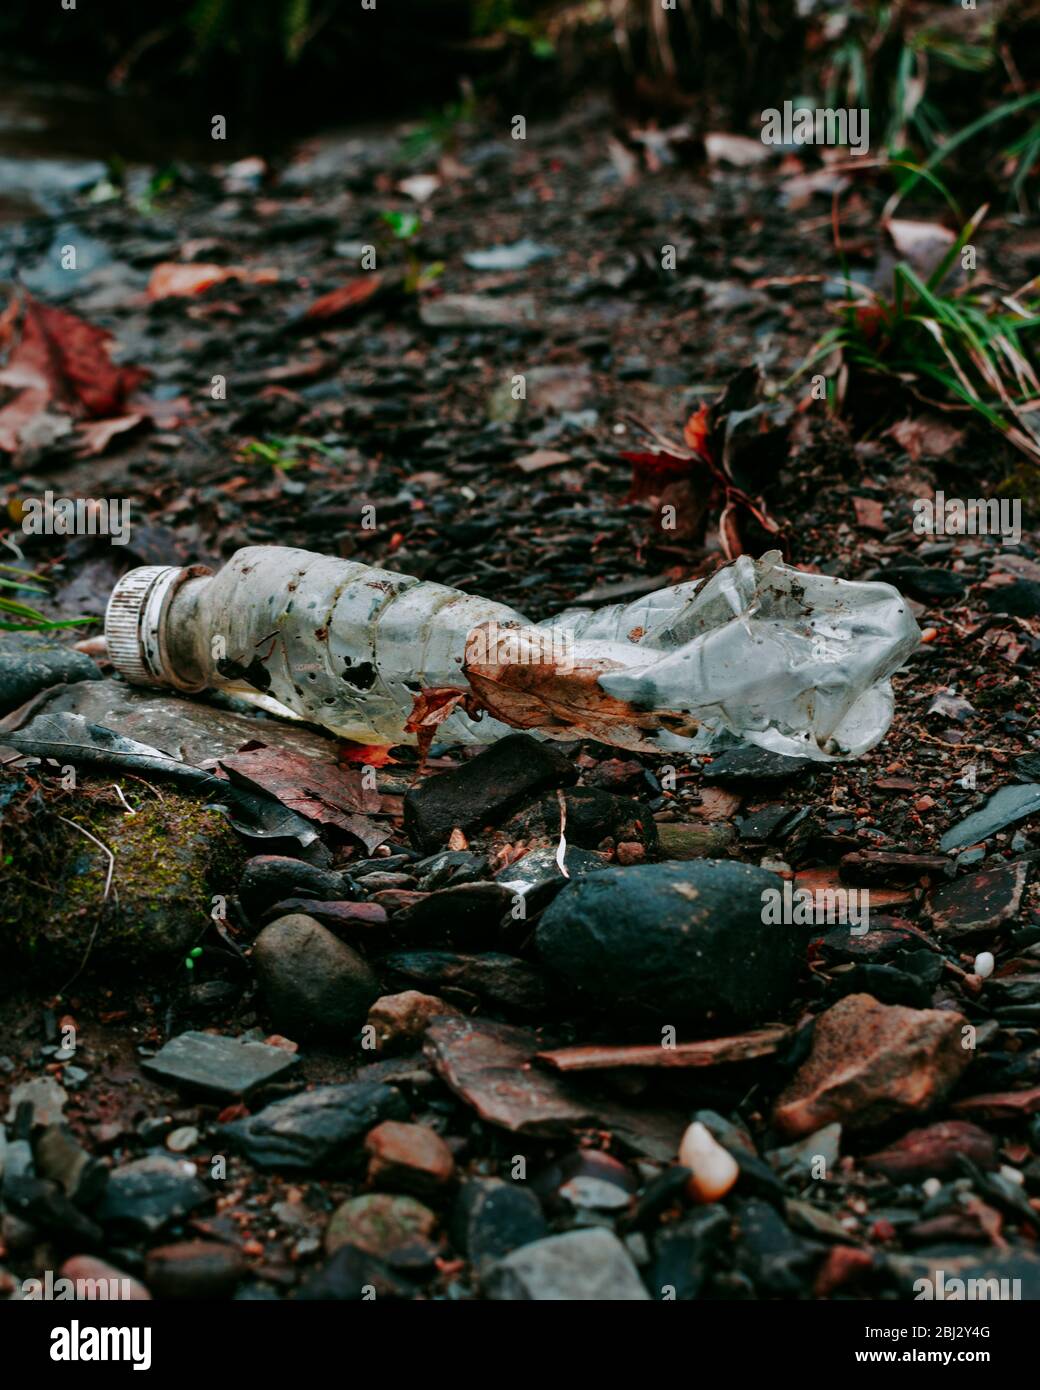 Plastic Pollution in Nature - Images were taken to spread awareness of the environmental crisis in the world. Stock Photo